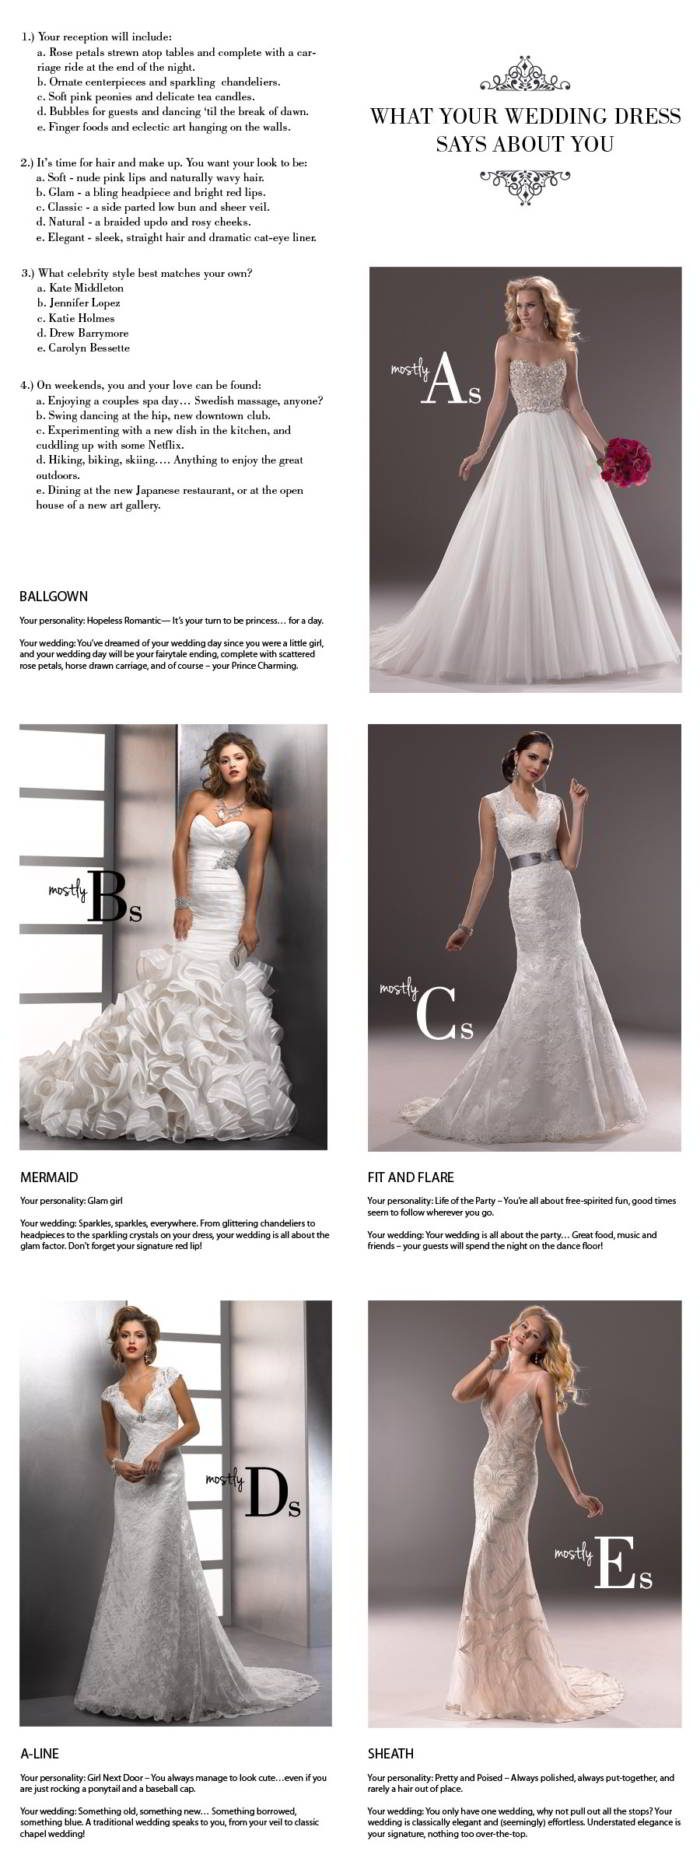 Want more dresses? See more ballgowns, sheaths, A-lines and more at ...